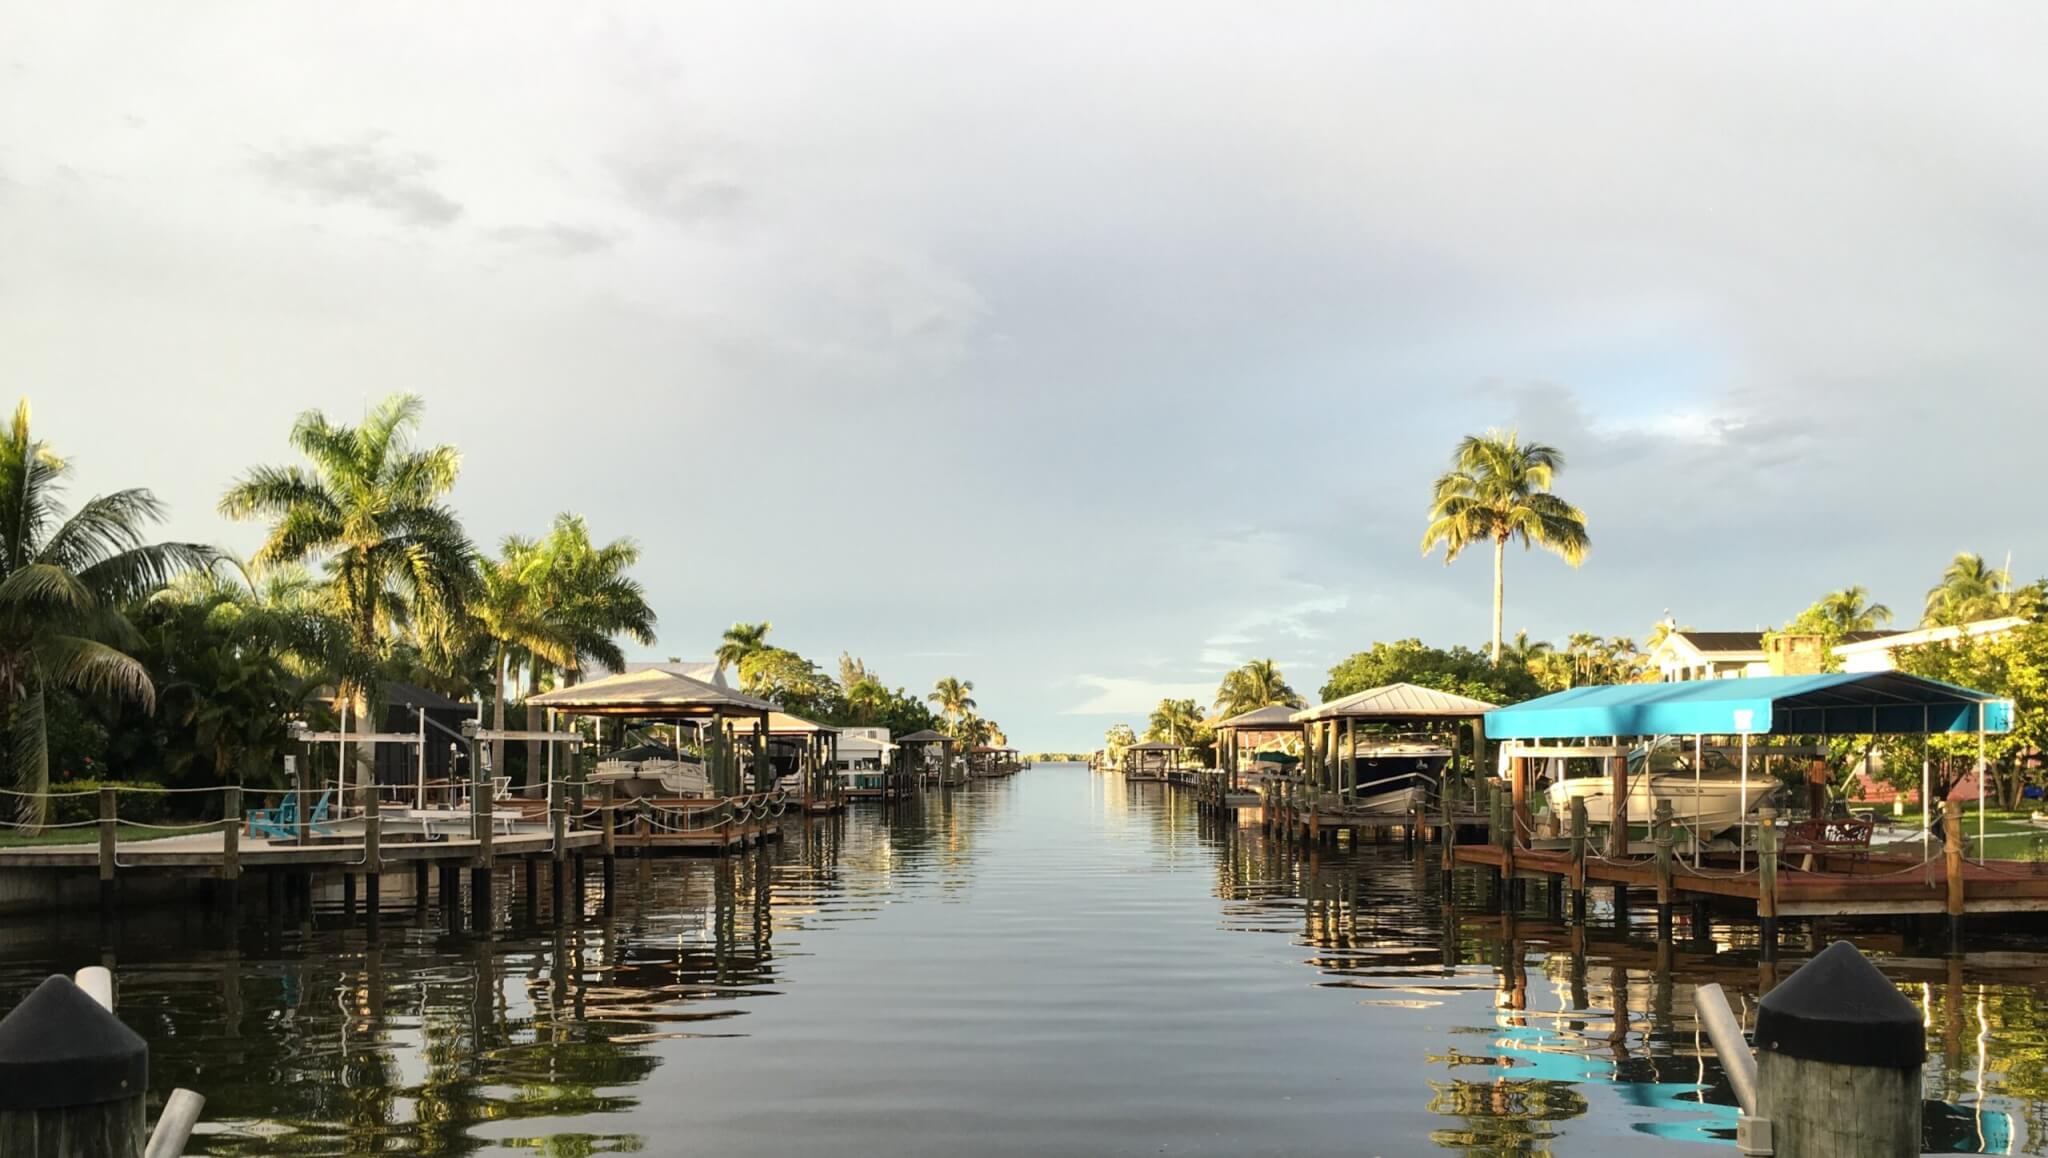 A canal in Fort Myers Beach, Florida